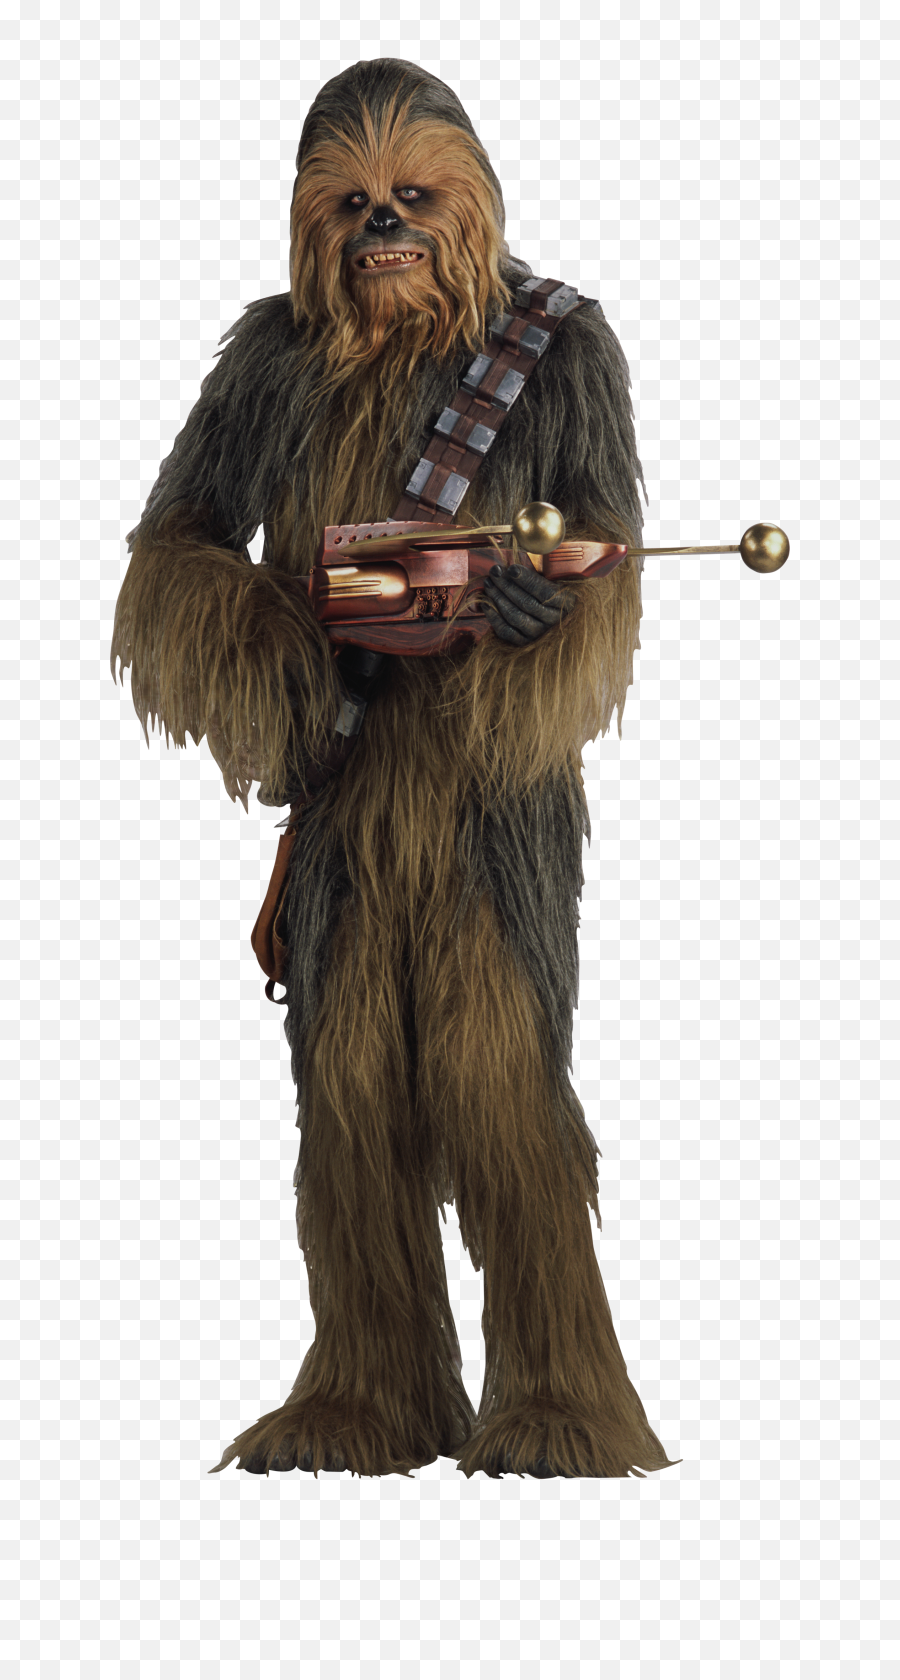 Download Star Wars File Hq Png Image - Wookie From Star Wars,Star Wars Png